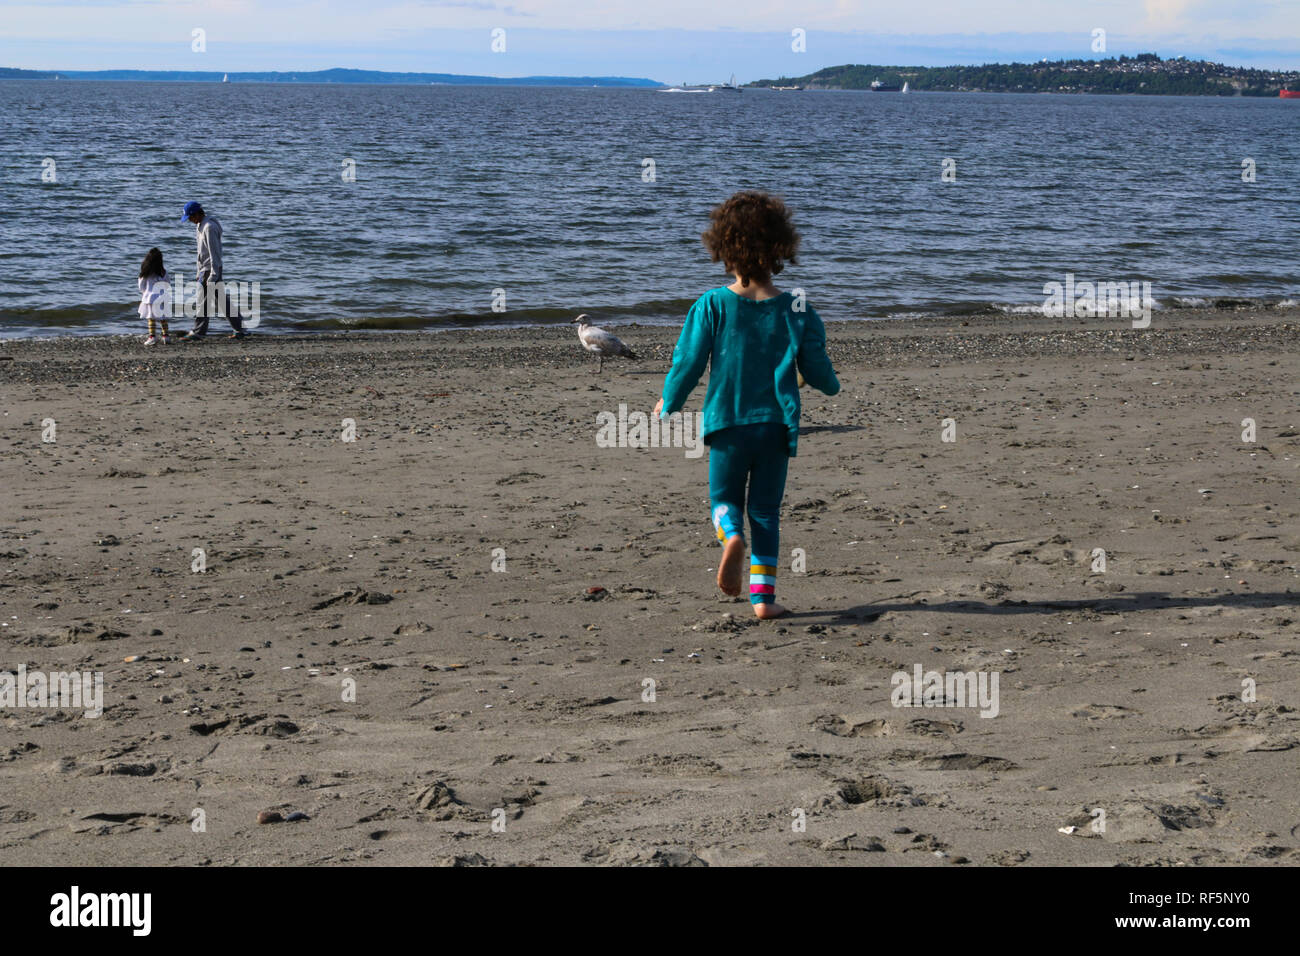 Child running at the shore of Alki Beach in West Seattle, Washington, chasing seagulls Stock Photo